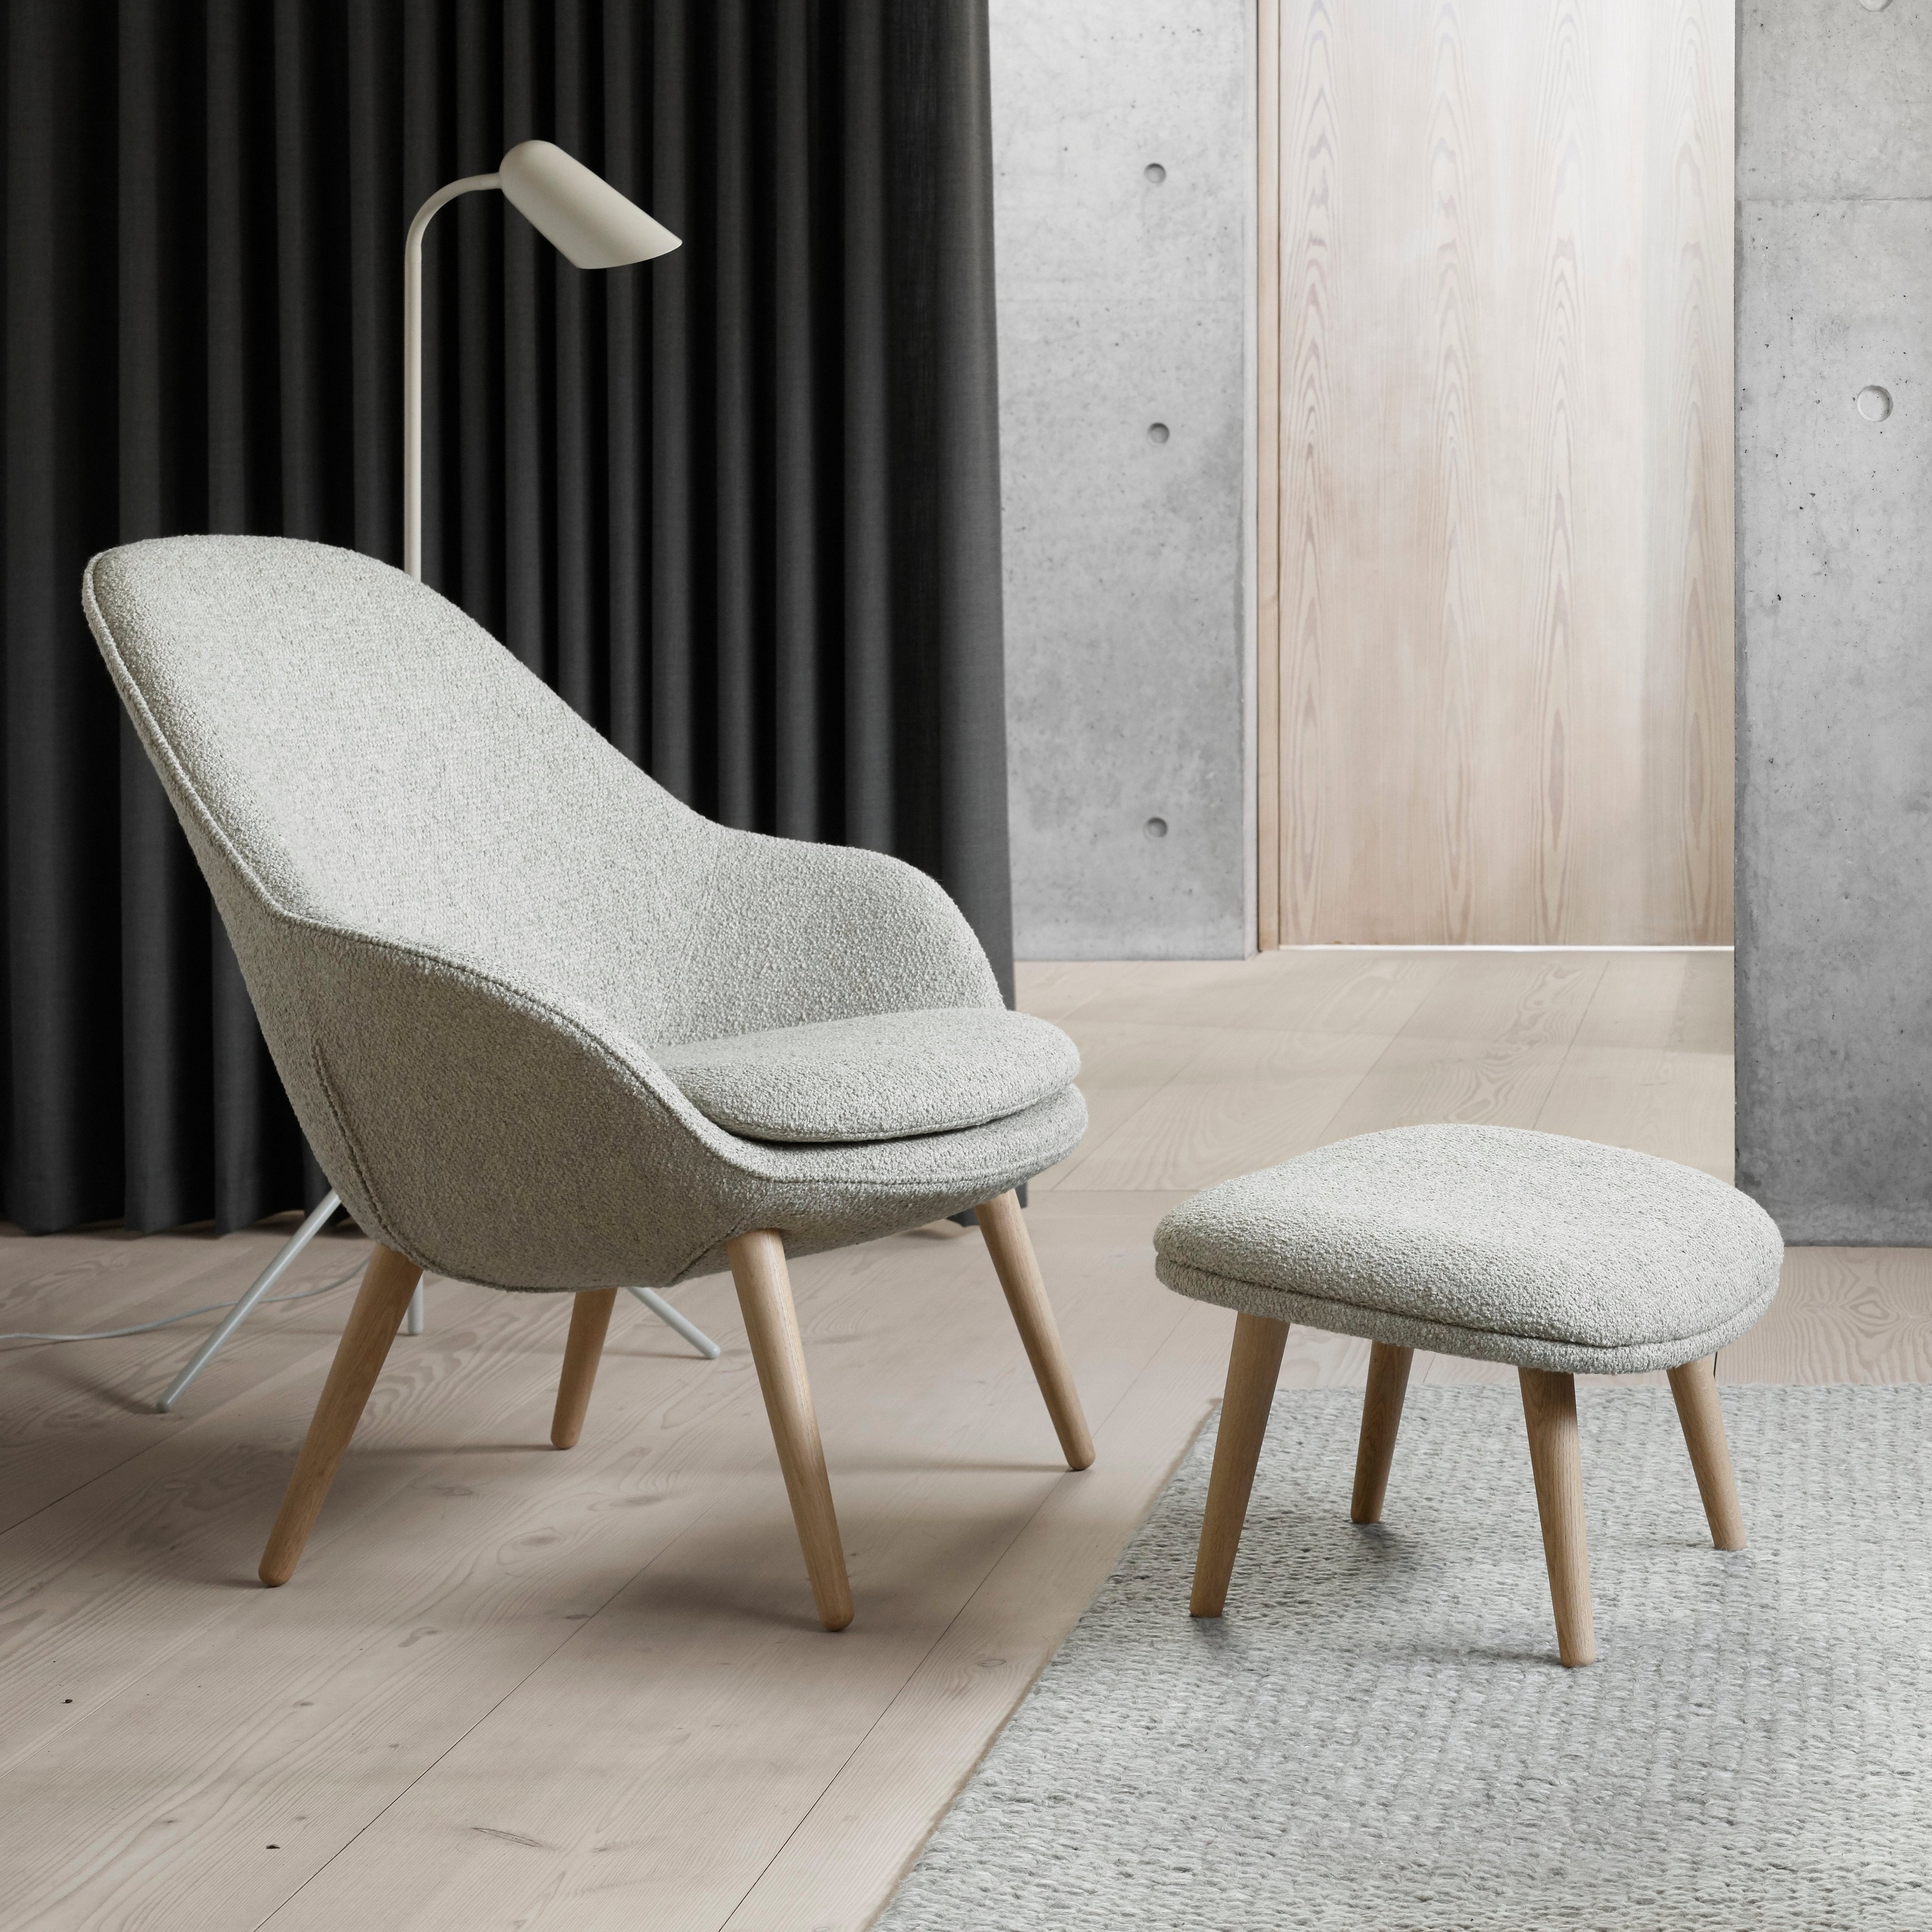 Modern chair with matching ottoman, floor lamp, dark curtains, and concrete accents.